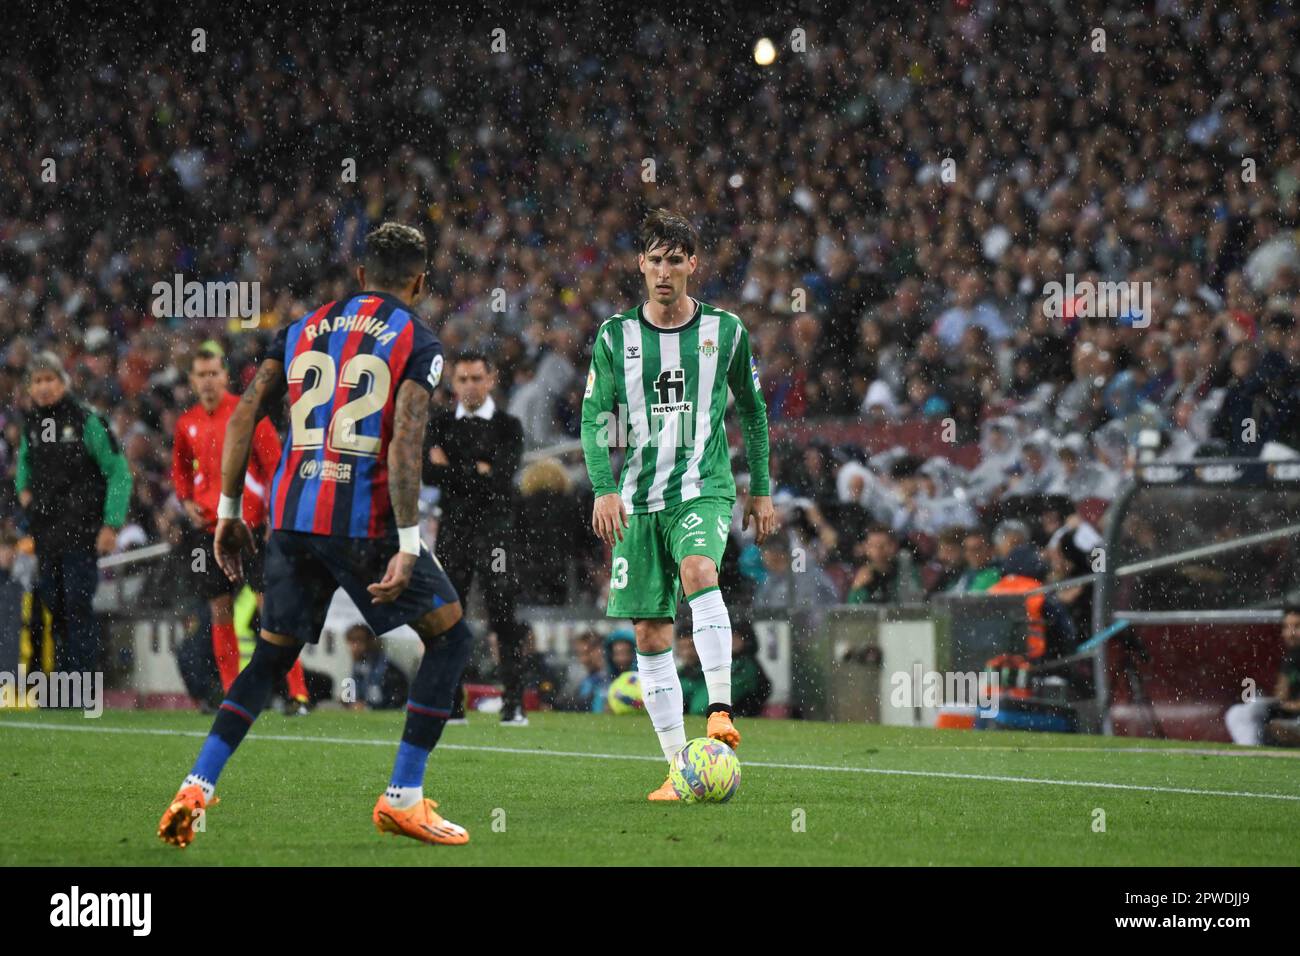 BARCELONA, SPAIN - APRIL 29: La Liga Santander match between FC Barcelona and Real Betis at Spotify Camp Nou on April 29, 2023, in Barcelona, Spain. (Photo by Sara Aribó/PxImages) Stock Photo